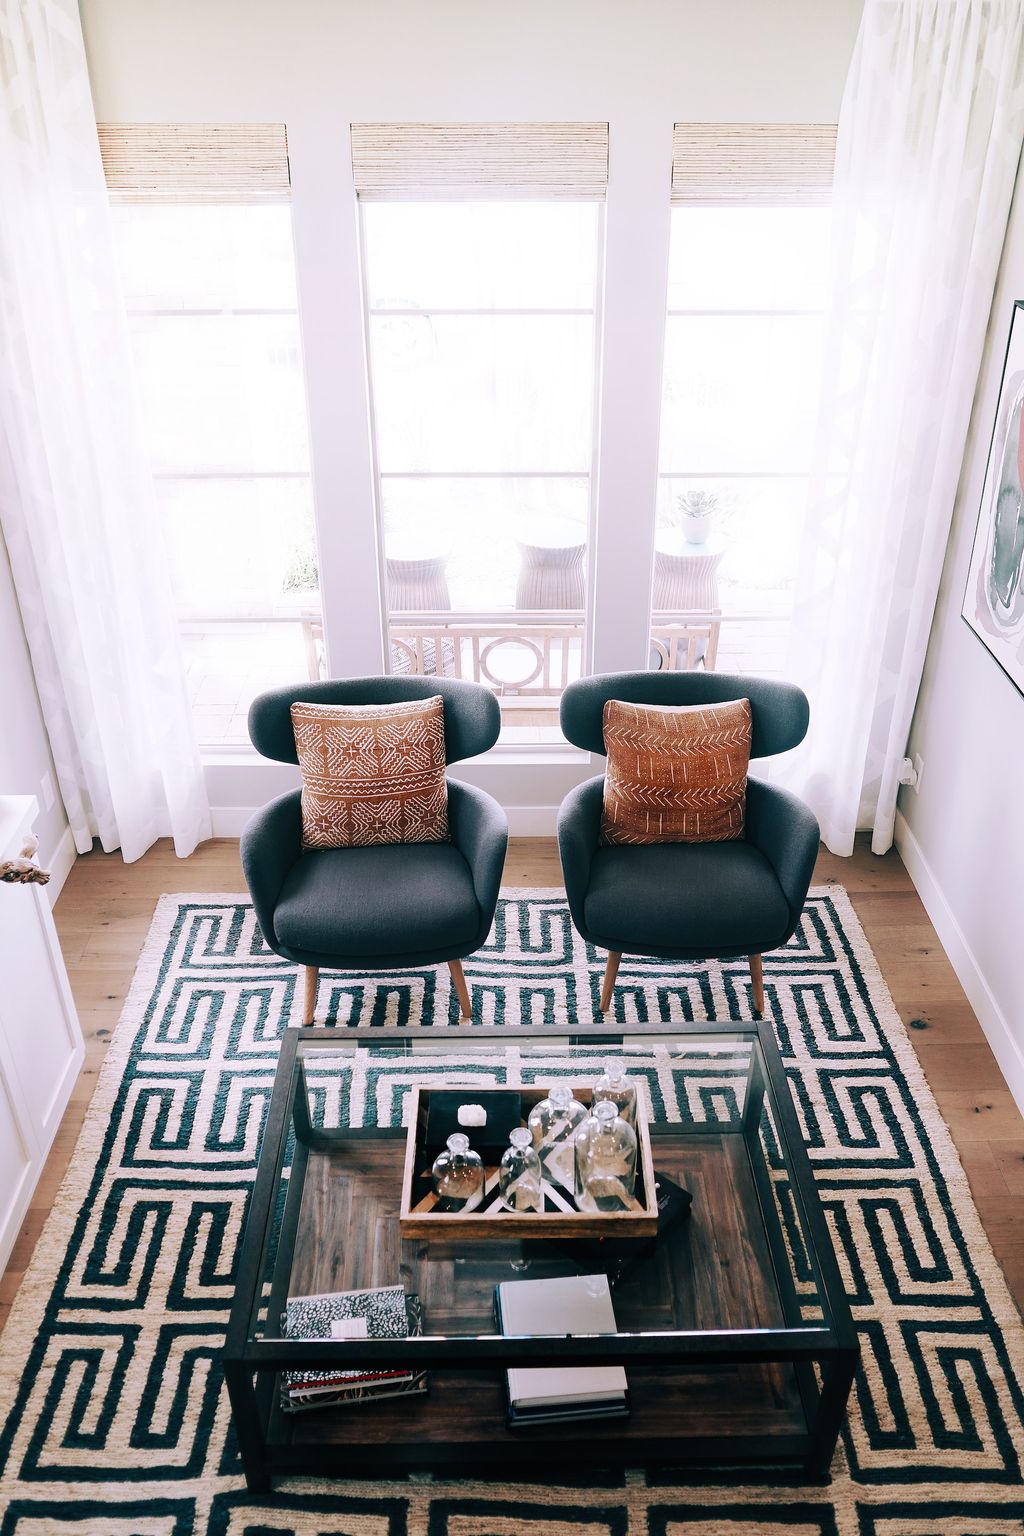 Living room with black and white design rug, two grey chairs and glass coffee table